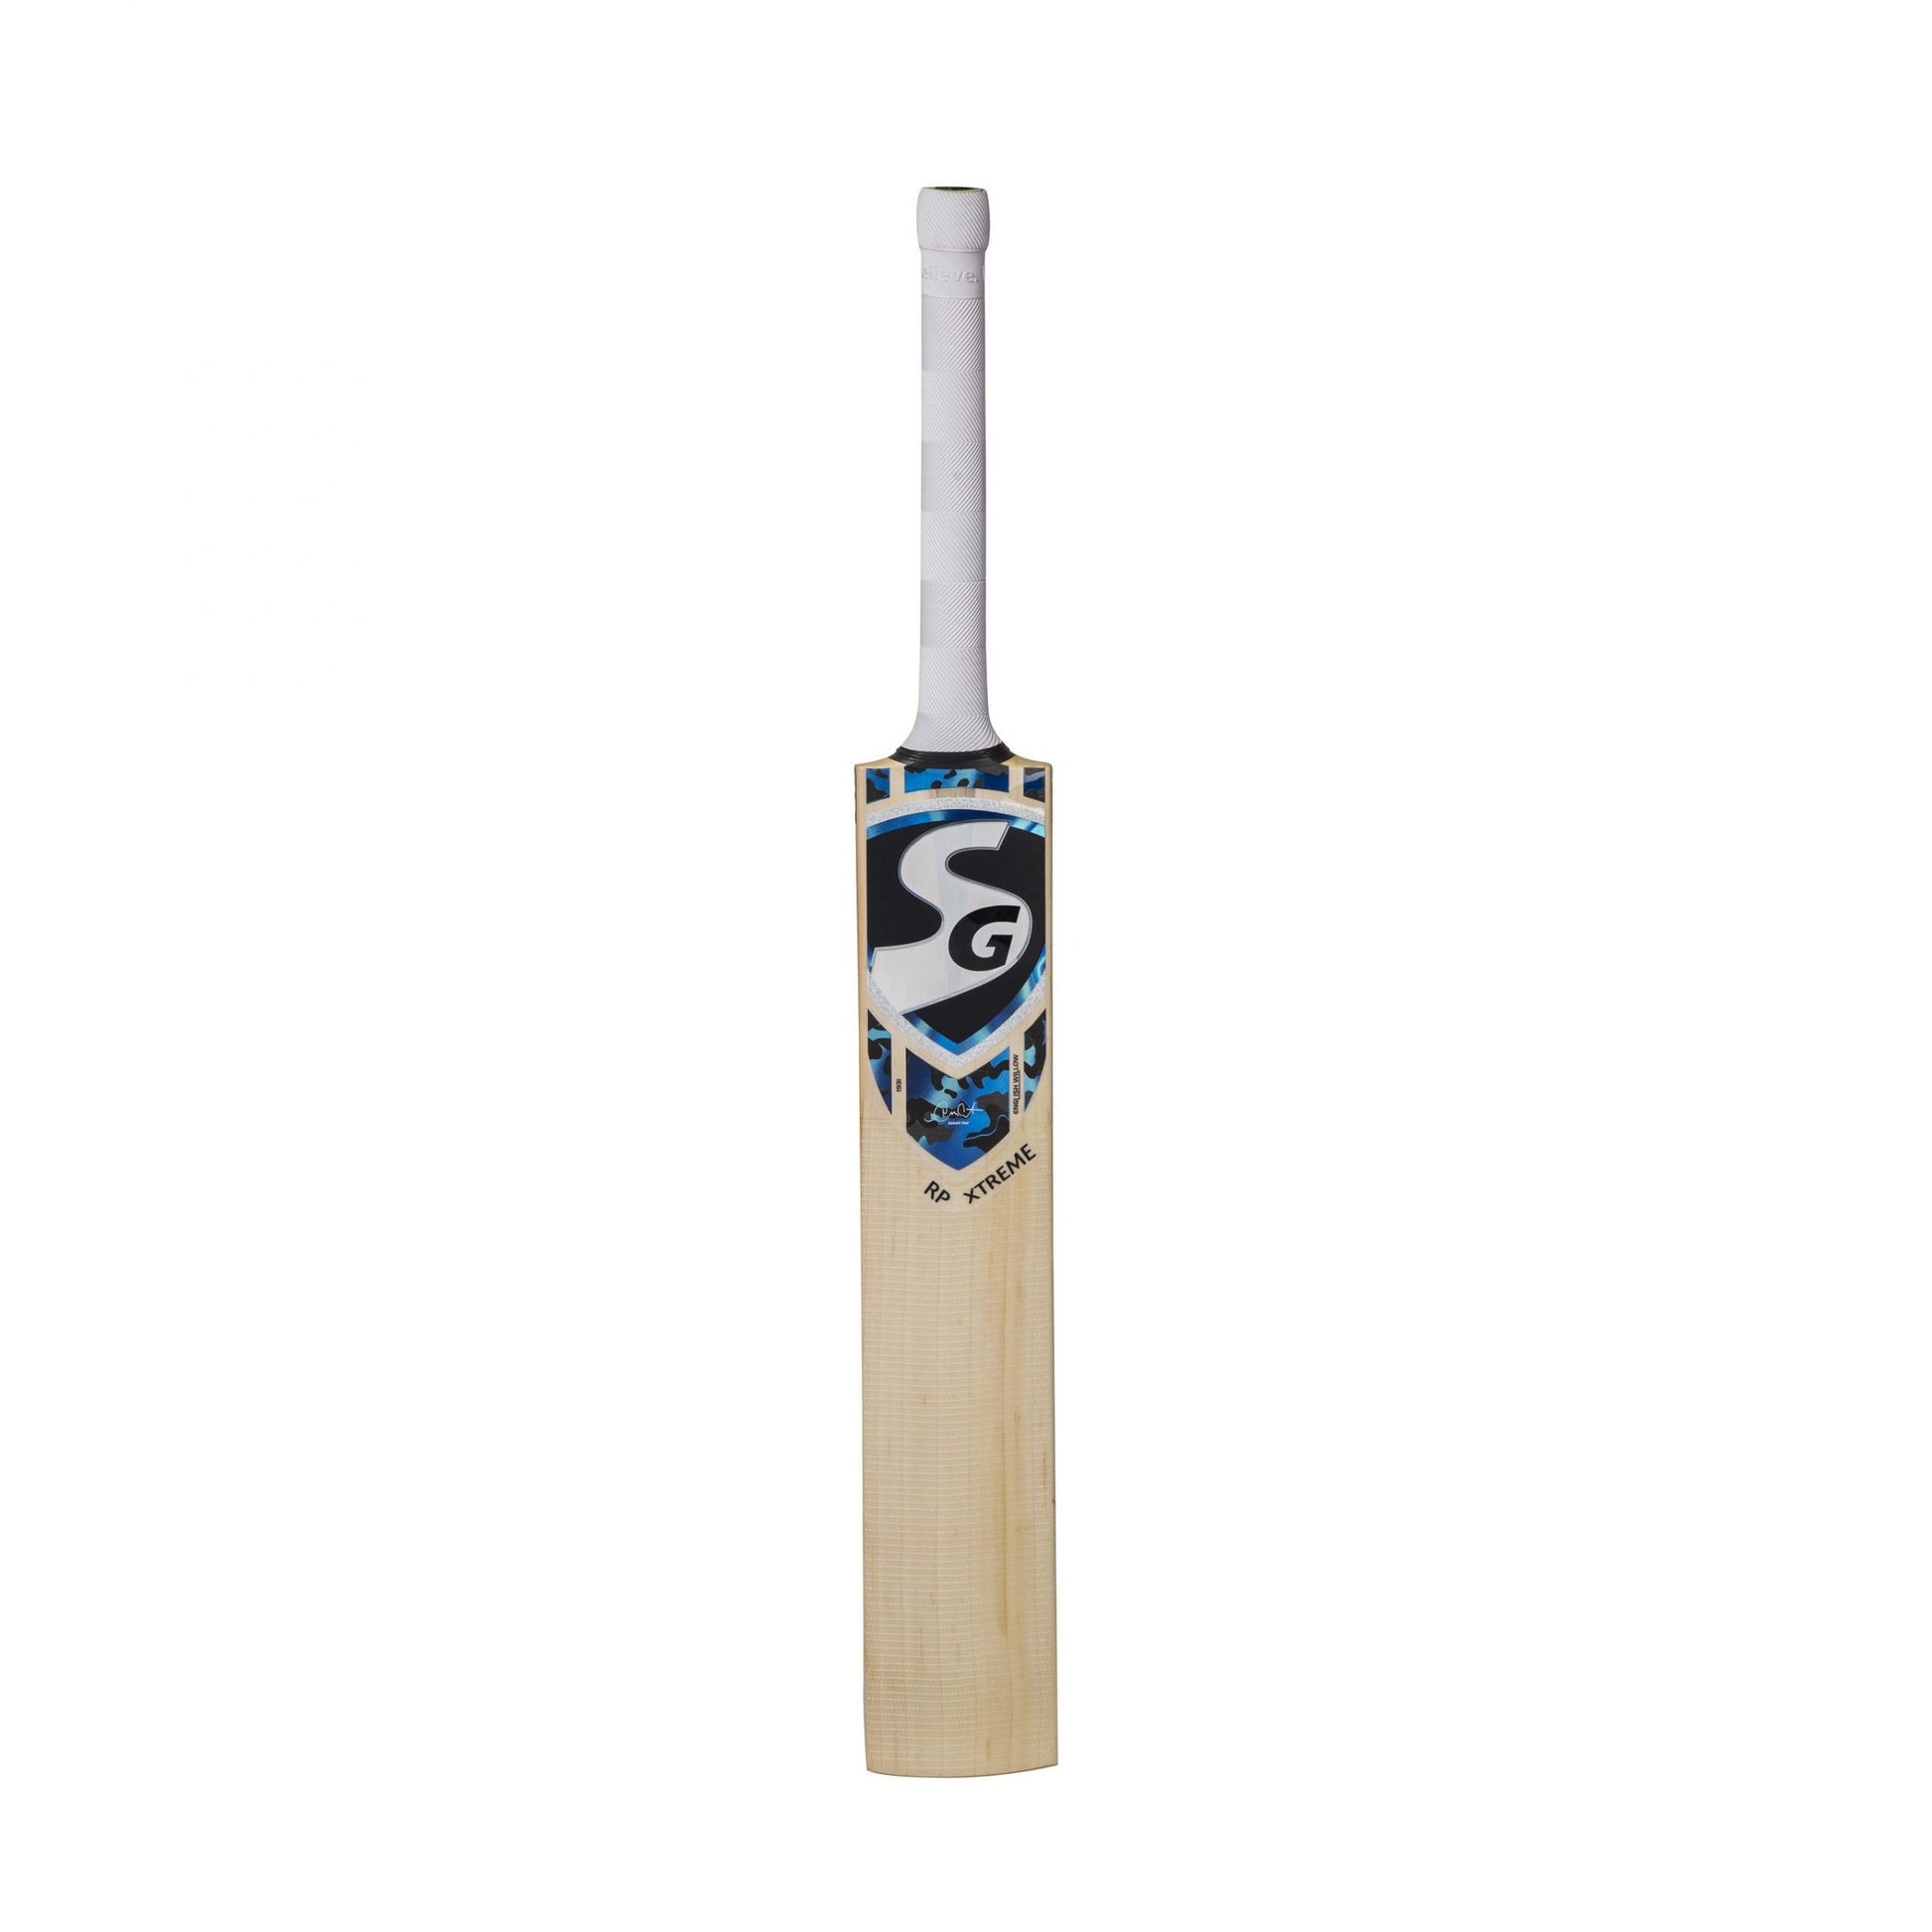 SG RP Xtreme Grade 5 world’s finest English Willow Cricket Bat (Leather Ball)